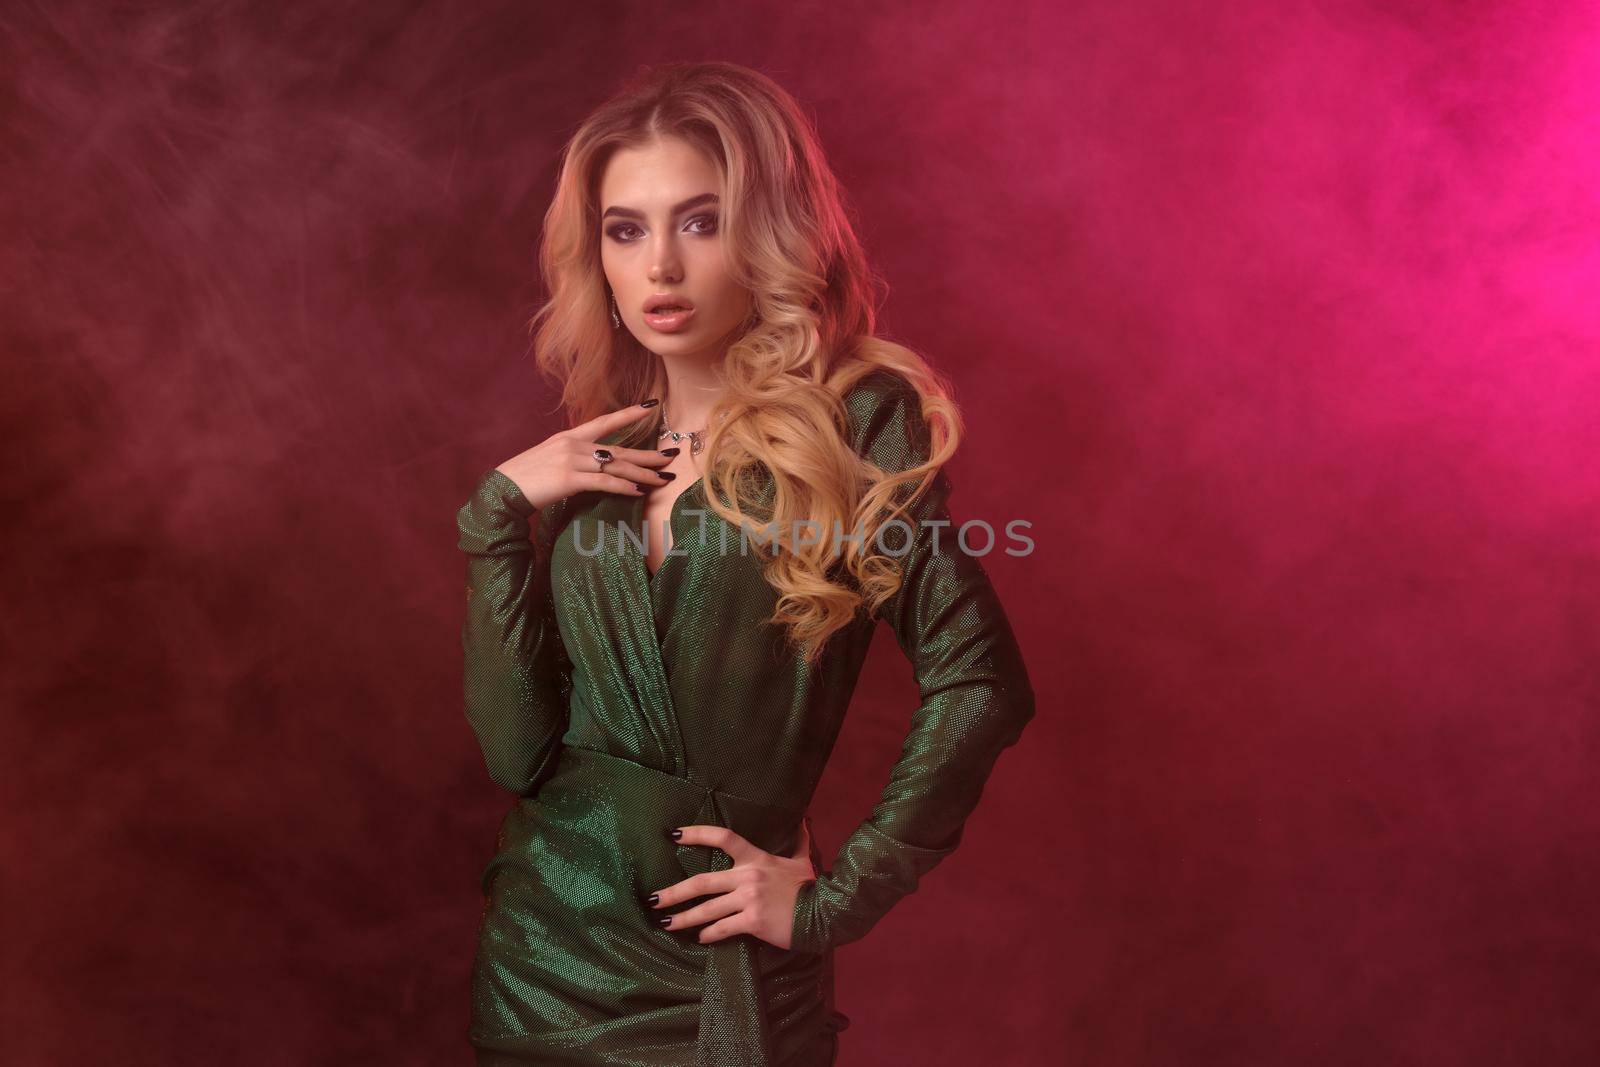 Alluring, blonde curly female in green stylish dress and jewelry. She has put her hand on waist, looking at you, posing against colorful smoky studio background. Fashion and beauty concept. Close up